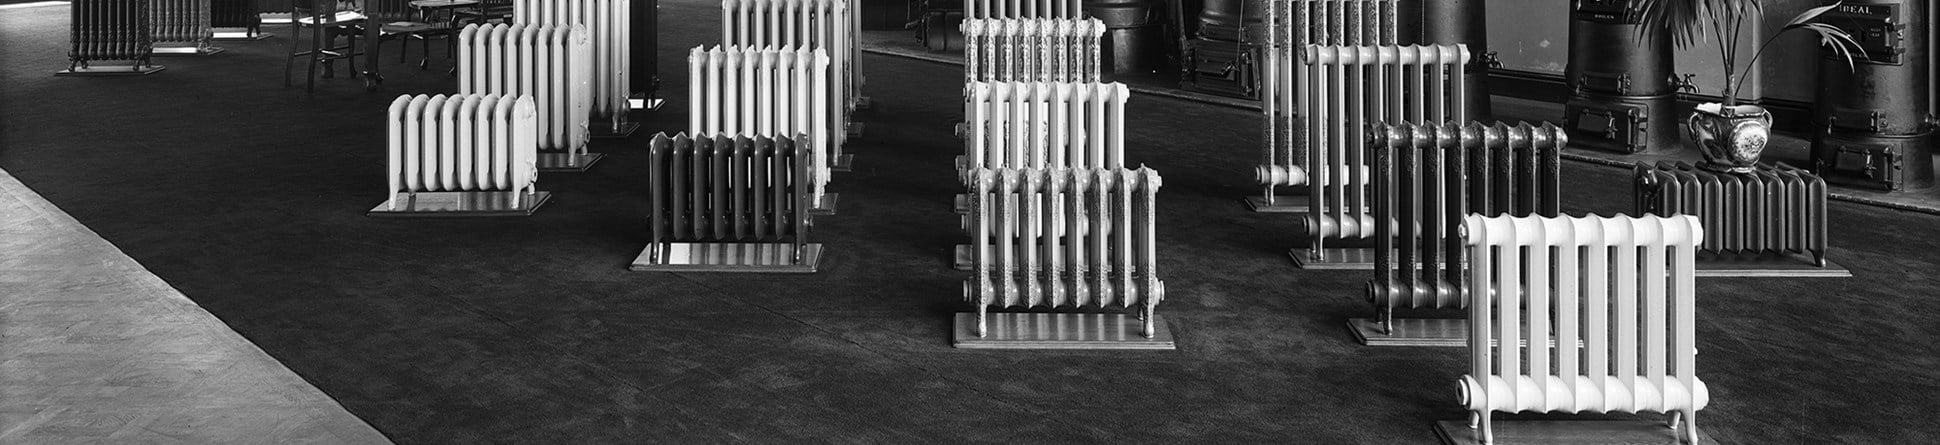 black and white photo of a large showroom with numerous radiators on central display.